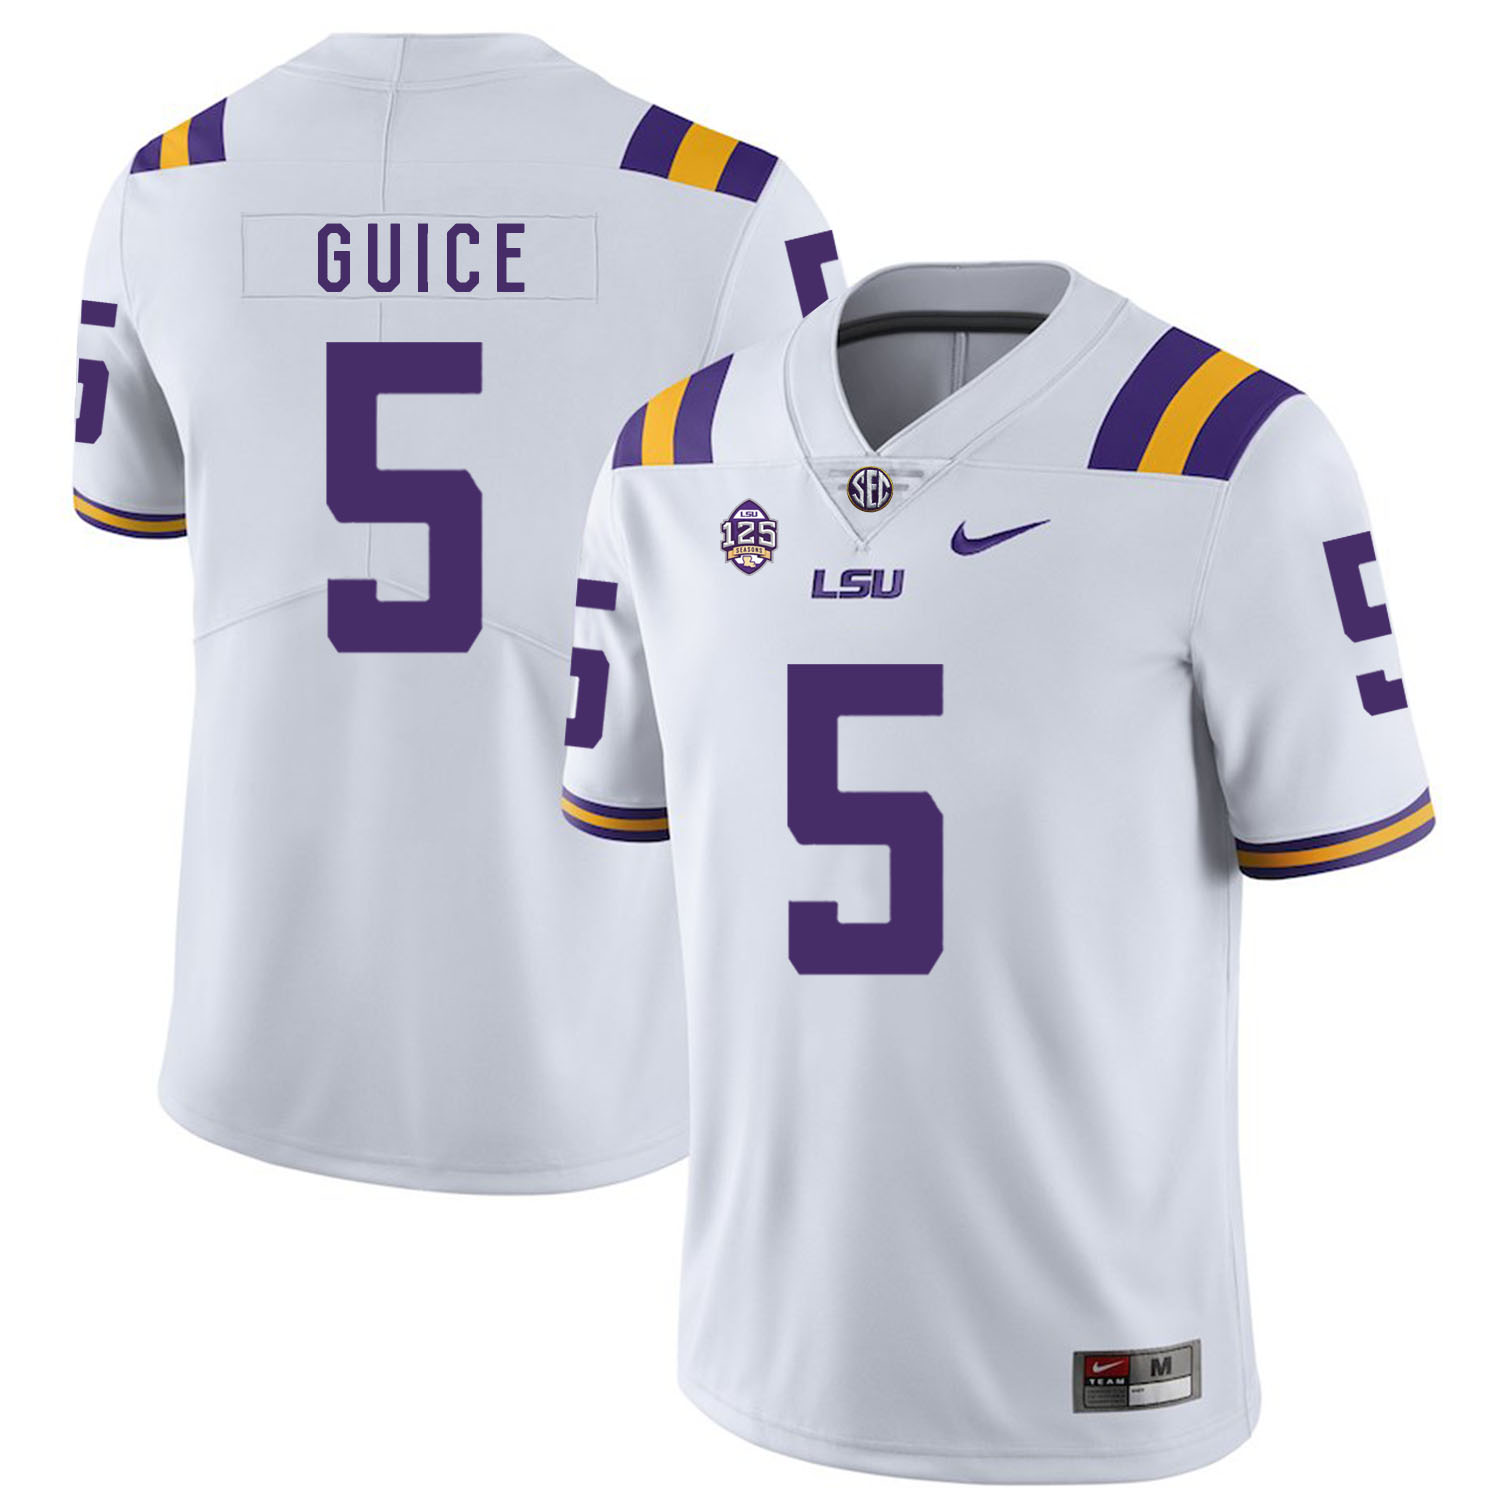 LSU Tigers 5 Derrius Guice White Nike College Football Jersey